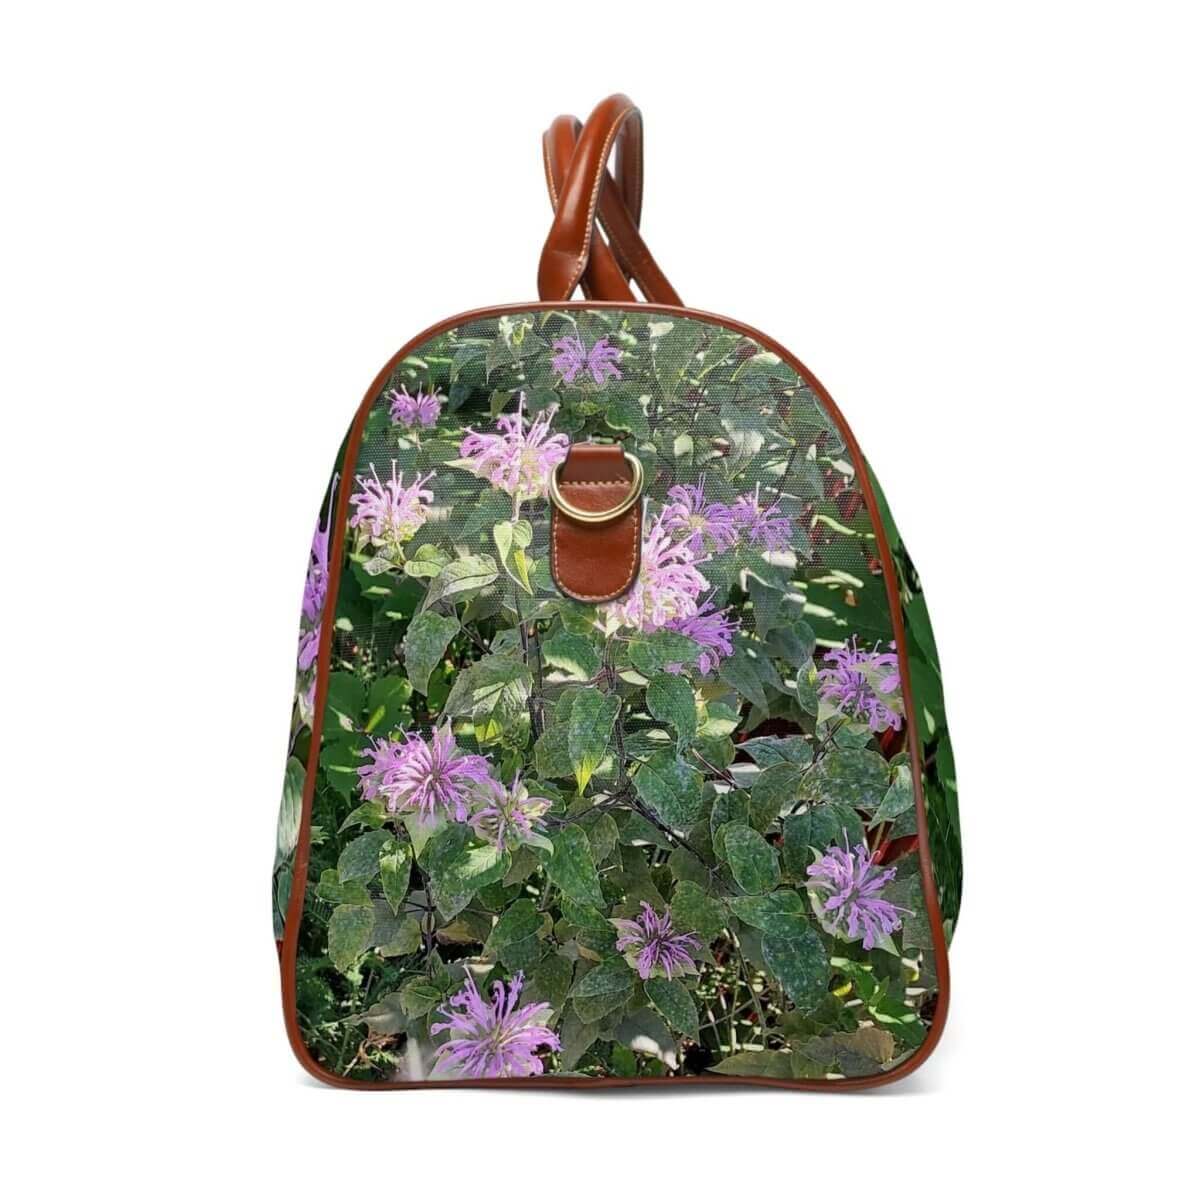 Waterproof Travel Bag from the Garden Collection - Hearth Home & Living